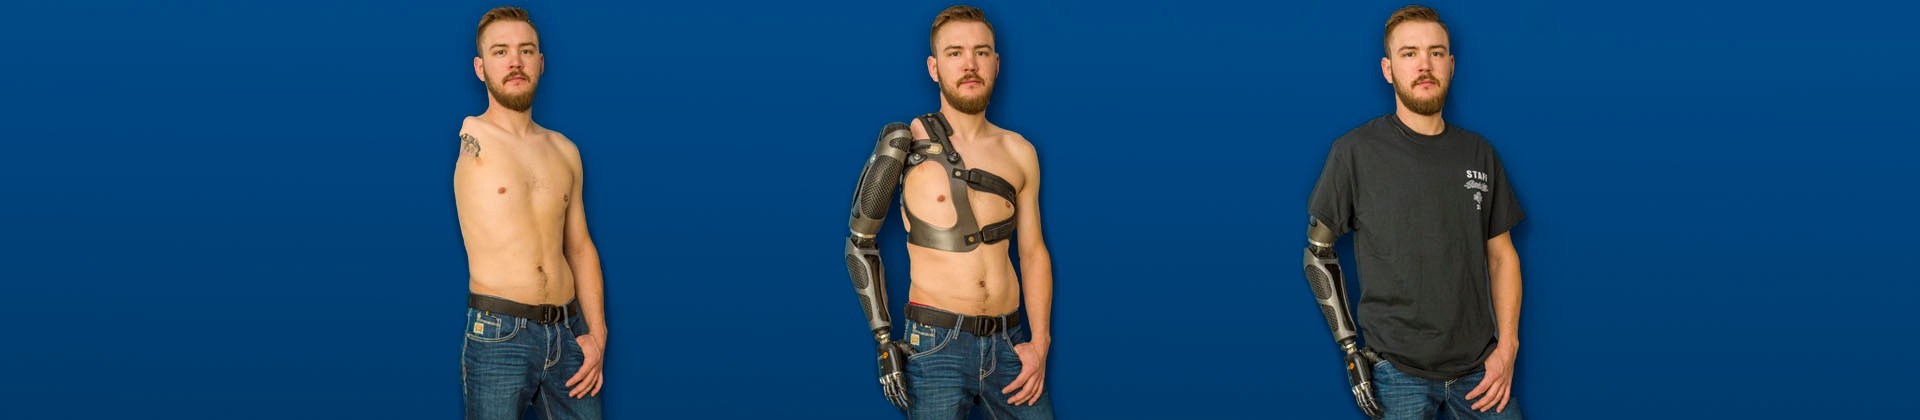 Sam Rosecrans before and after prosthesis